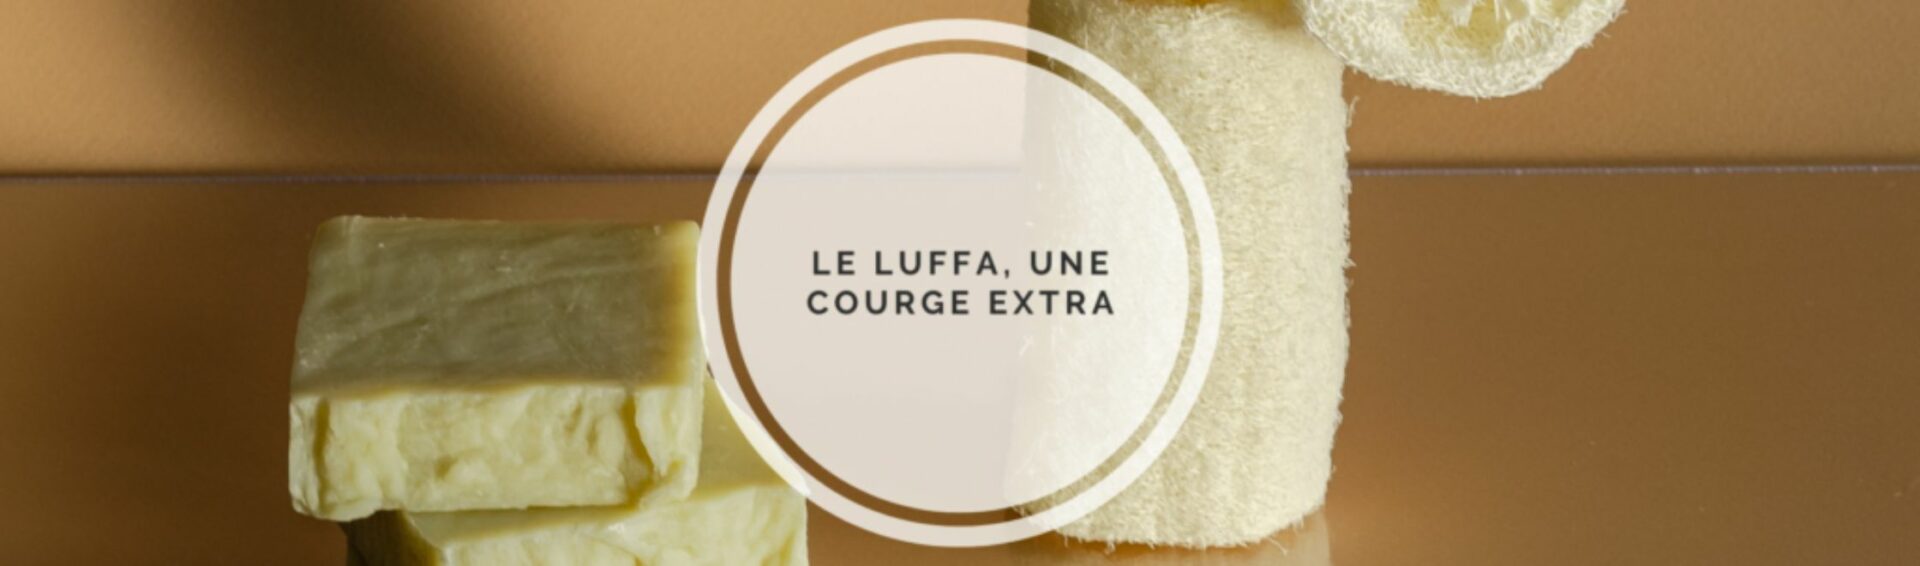 luffa une courge extra